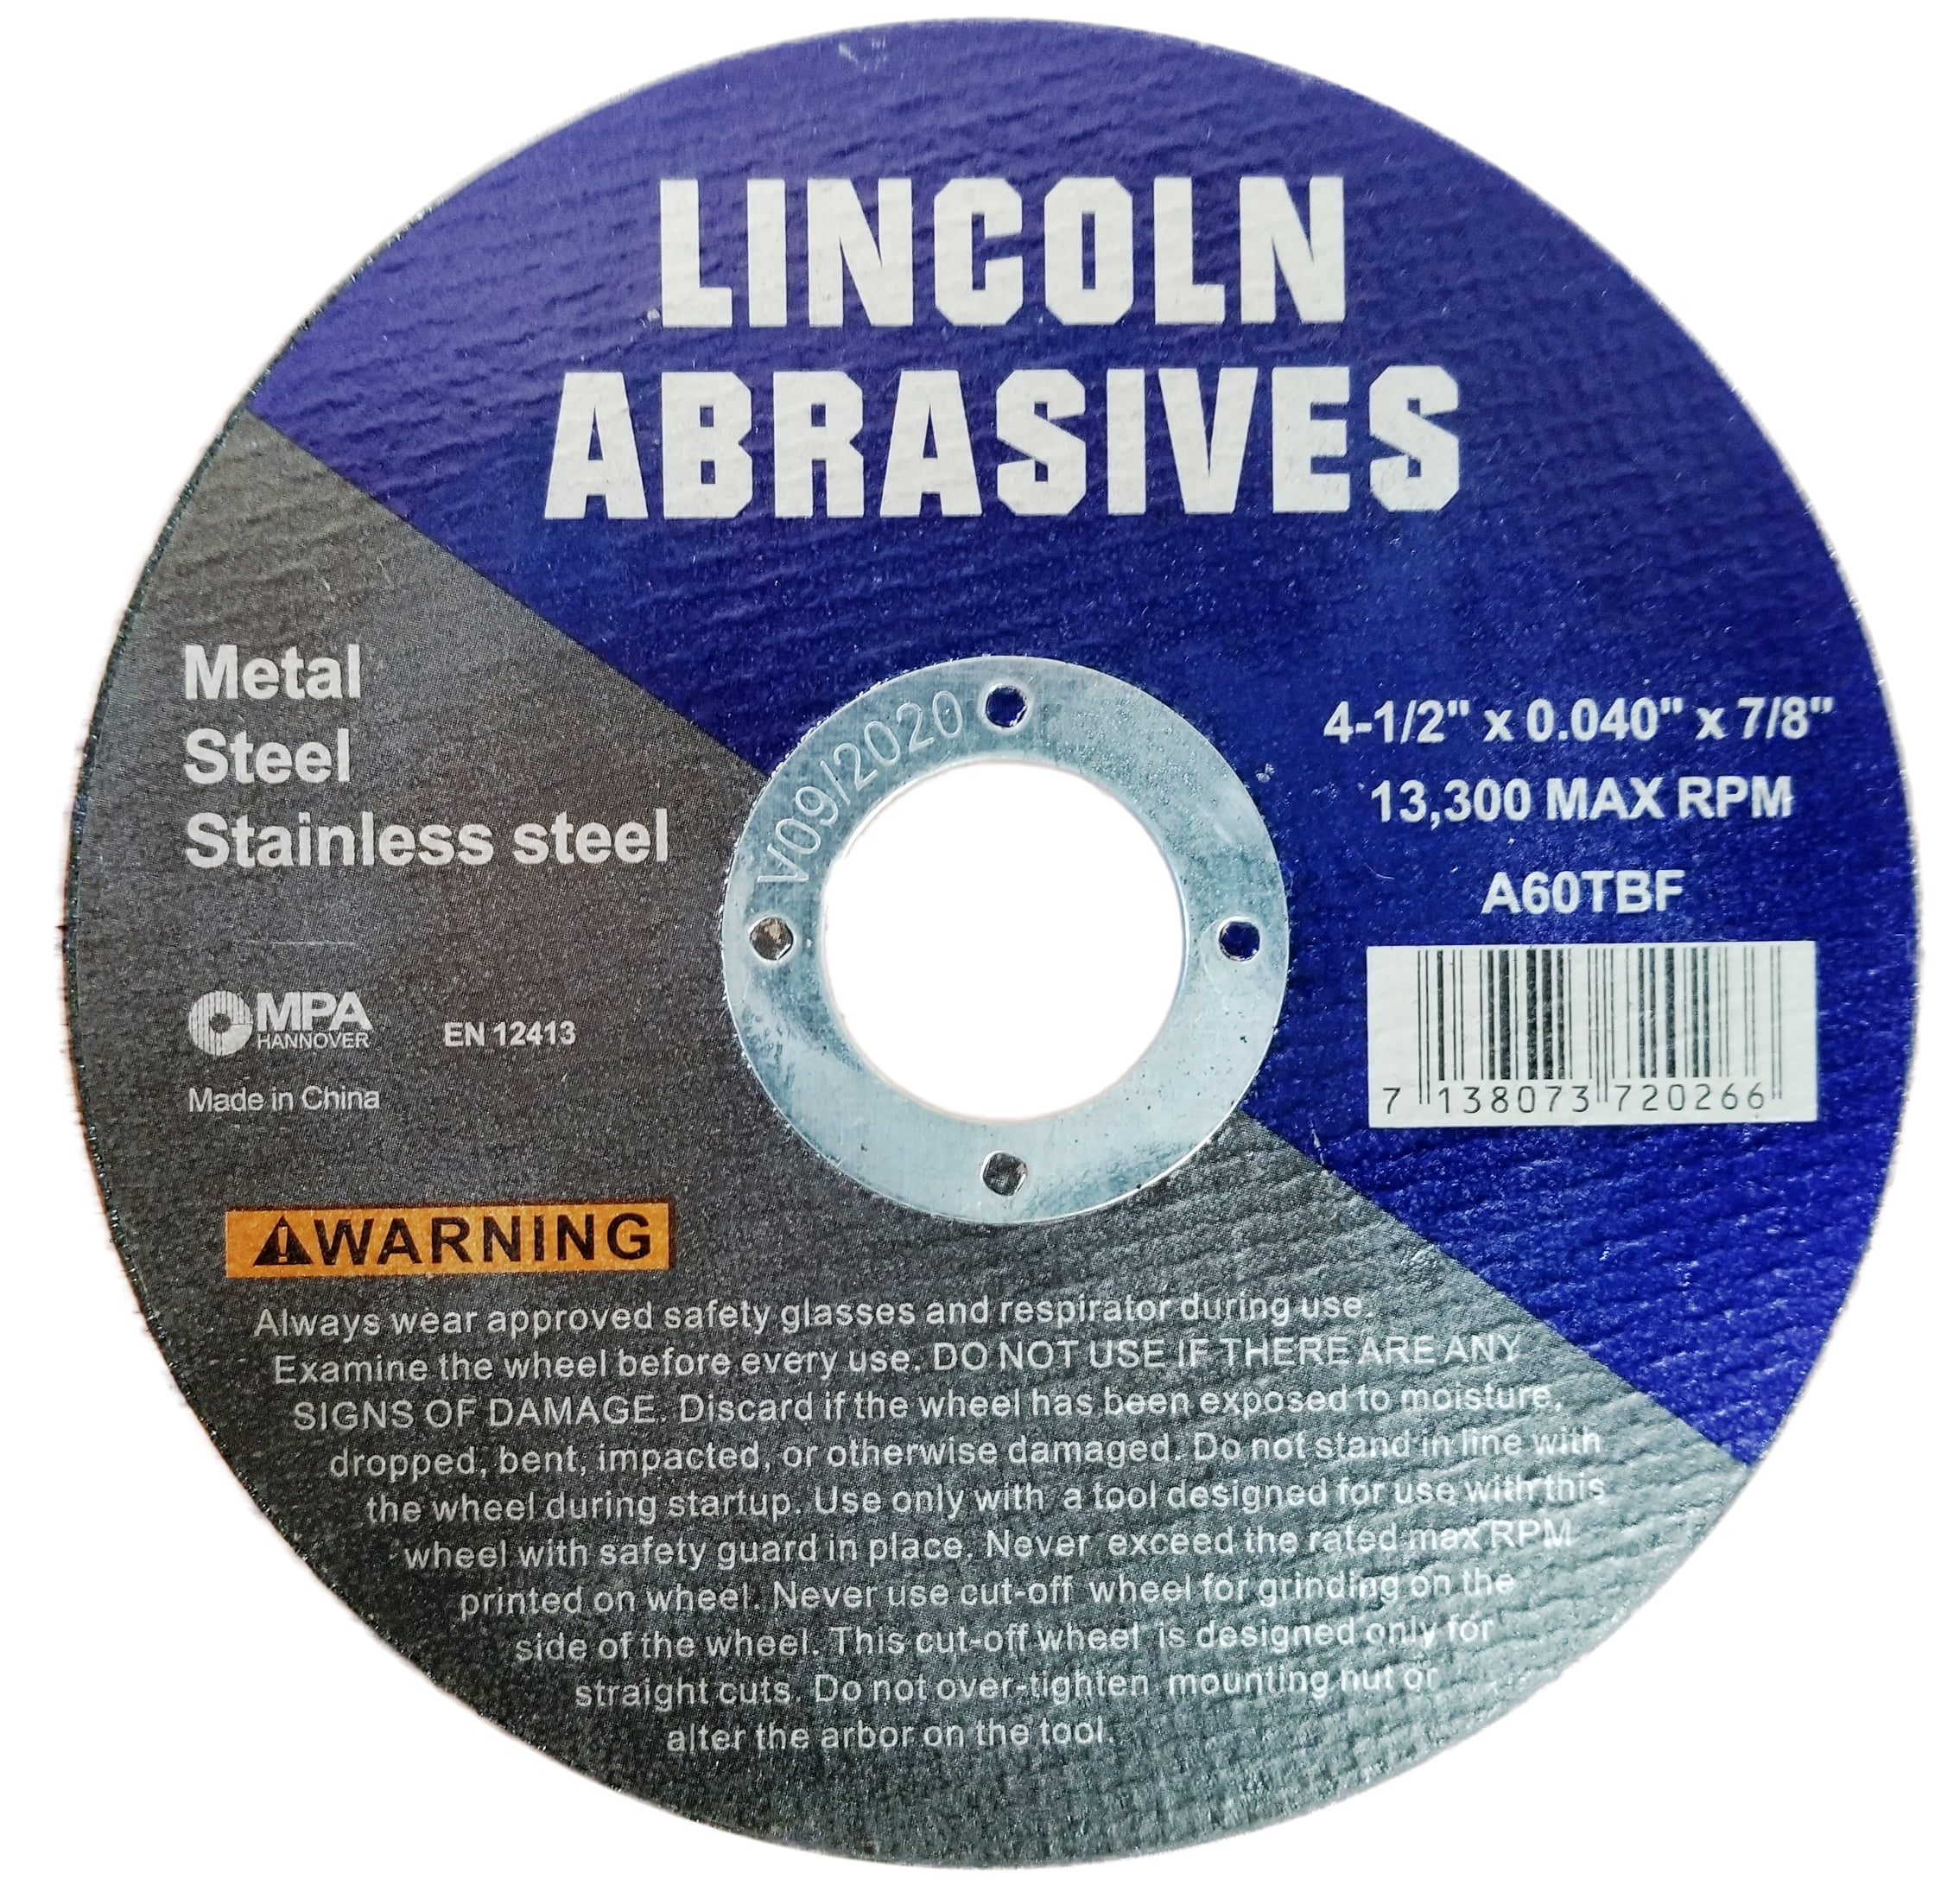 100 Industrial 4.5" x.040"x7/8" Cut-off Wheel Stainless Steel Metal Cutting Disc 